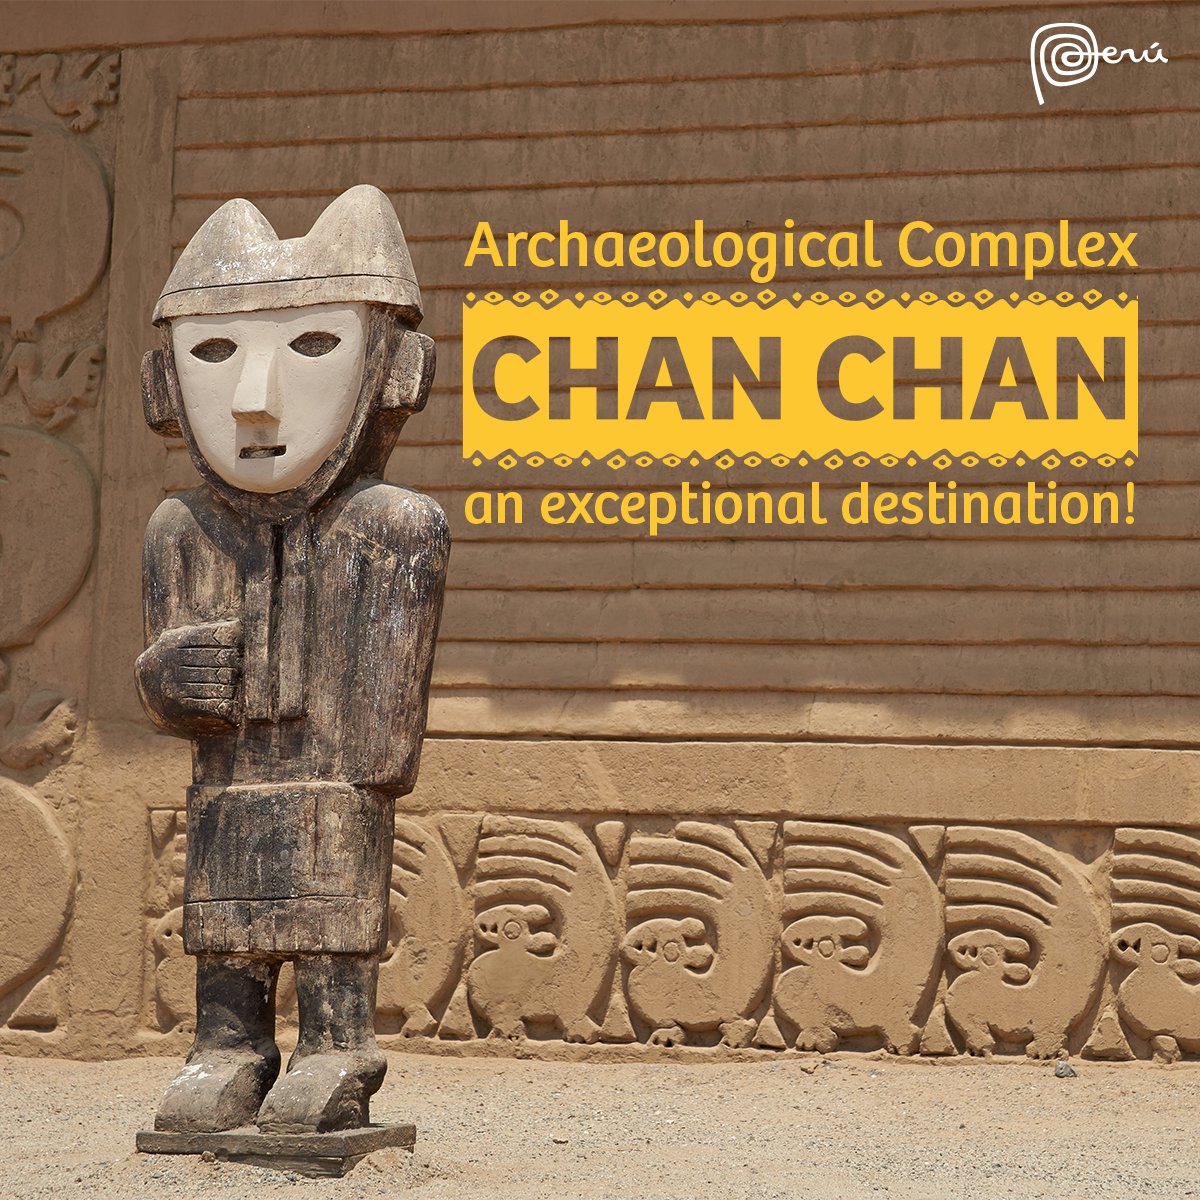 GREAT NEWS! 💯🇵🇪 The majestic and enigmatic #ChanChan Archaeological Complex, in the department of La Libertad, has just been granted with the highest tourist recognition in #Peru: the Hierarchy 4 status and there are now 9 destinations that own this special distinction.